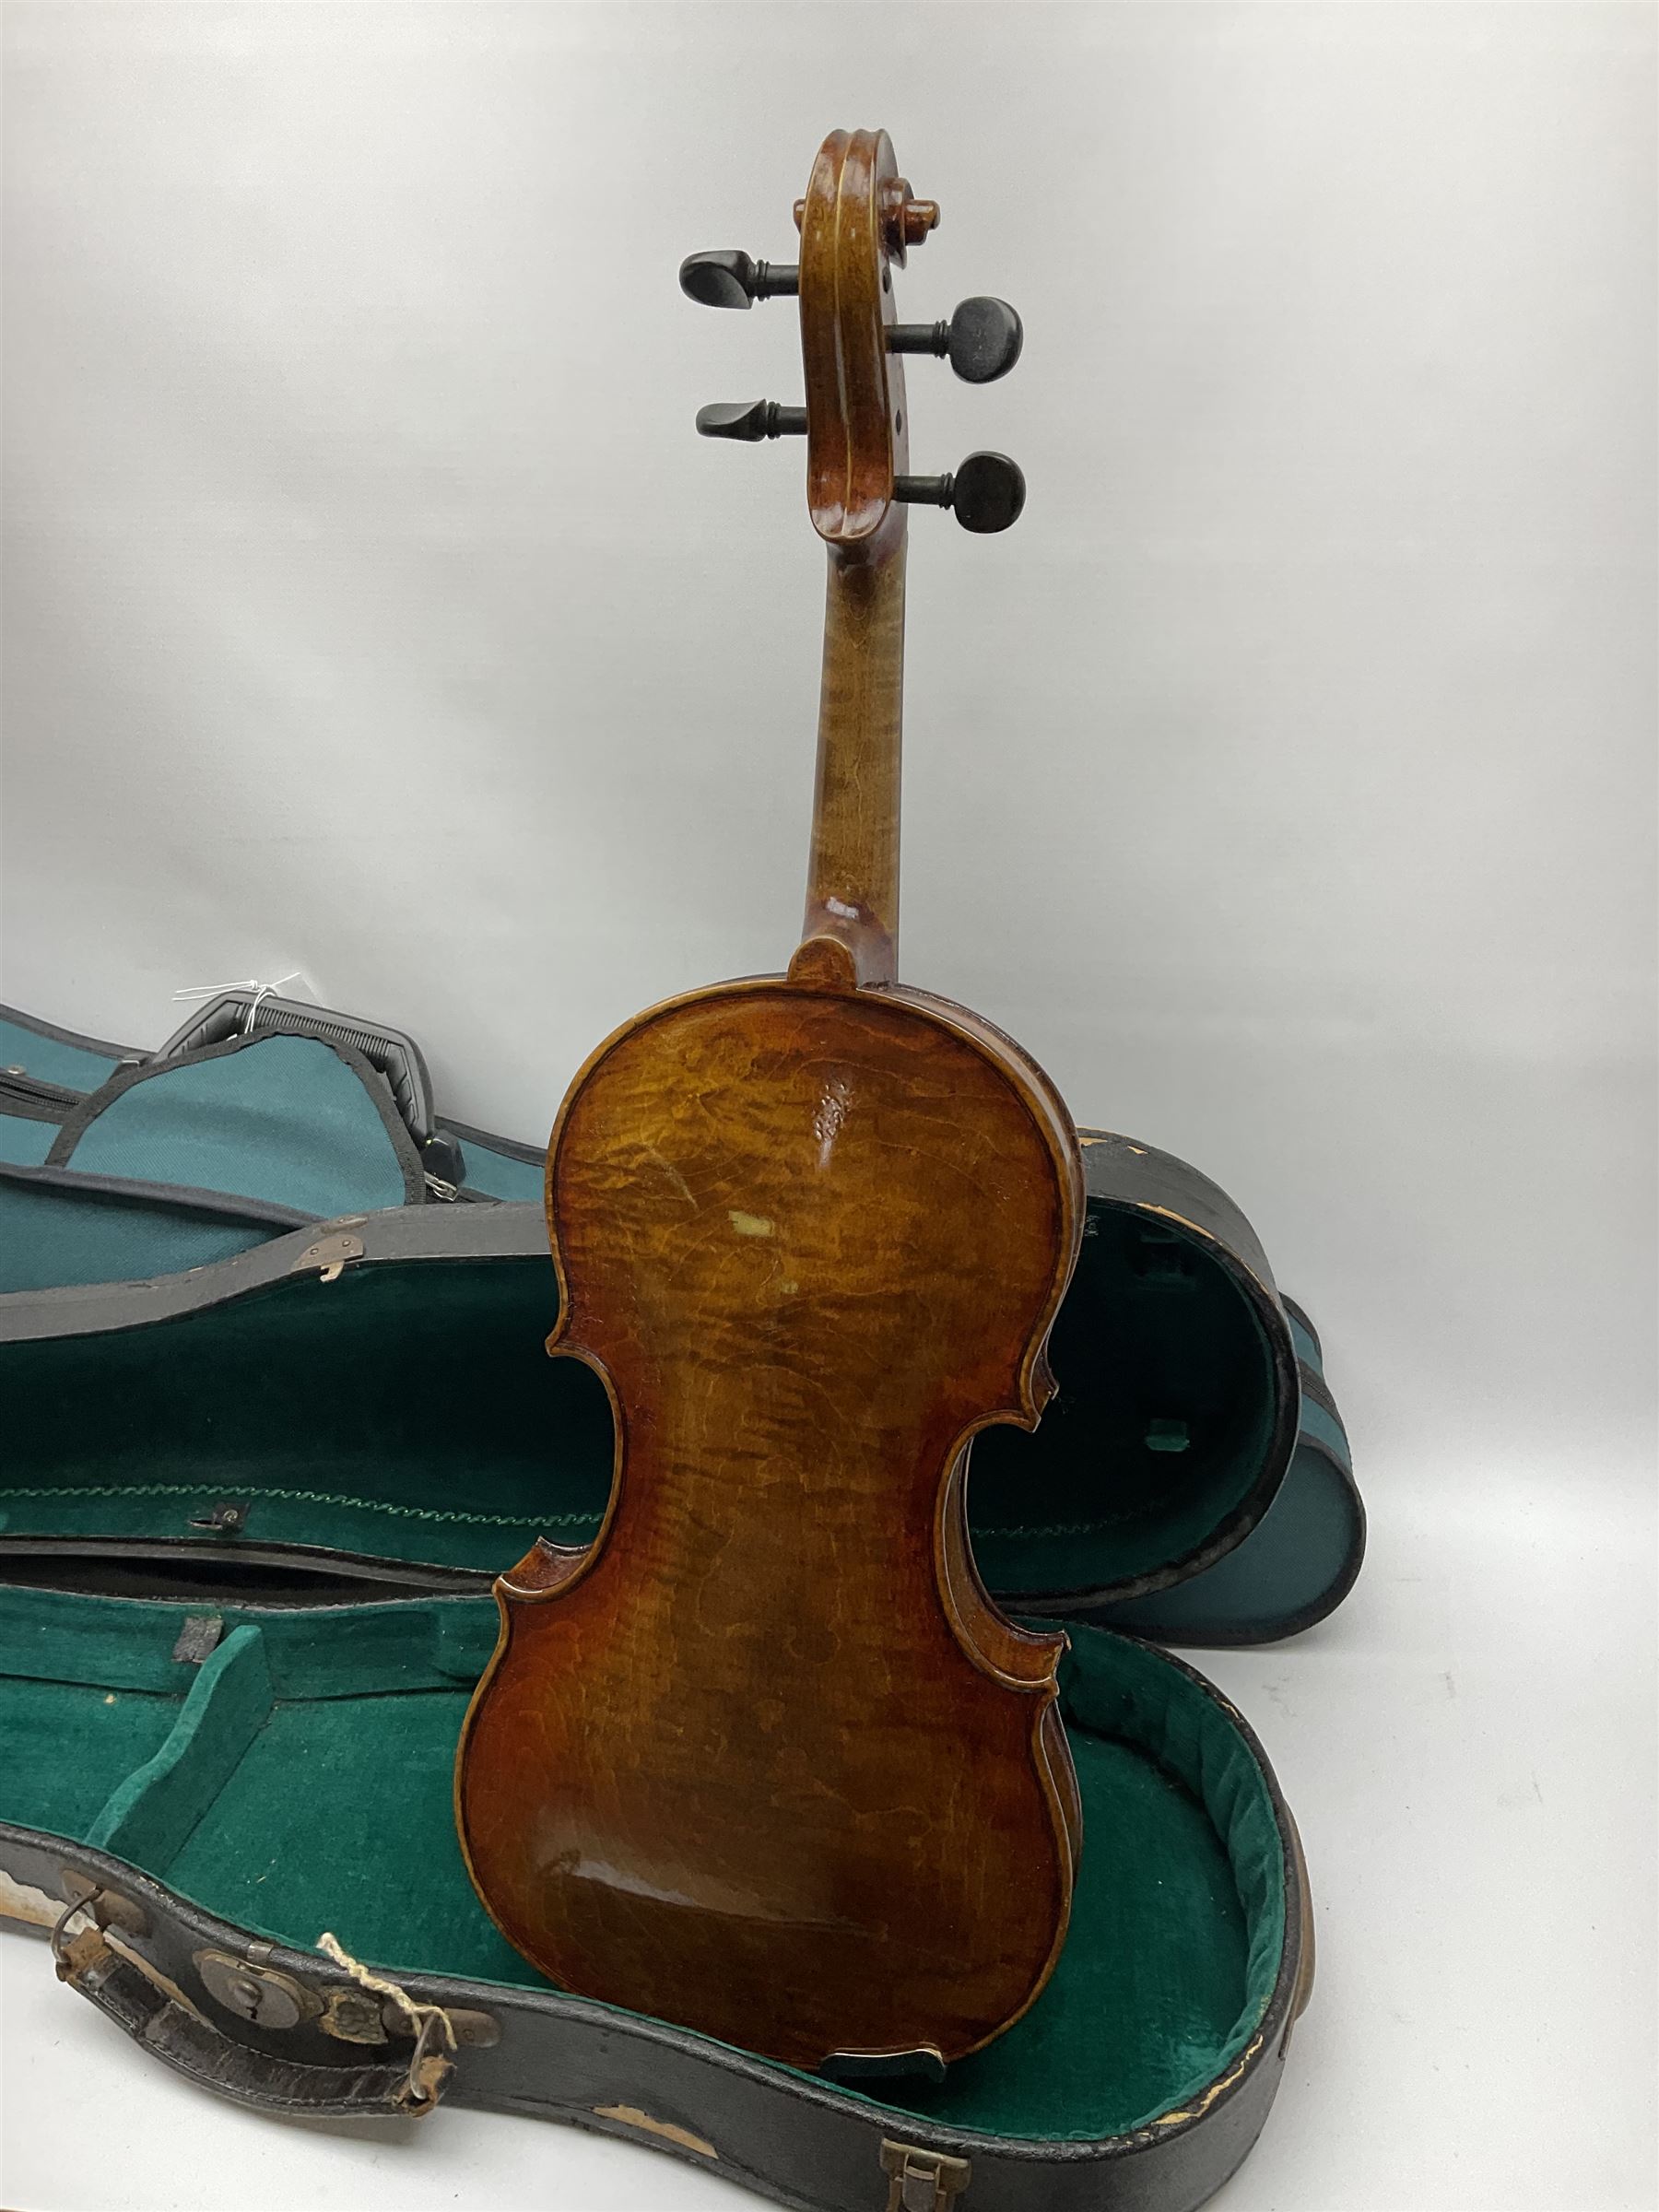 French violin c1900 with 36cm one-piece maple back and ribs and spruce top - Image 8 of 13